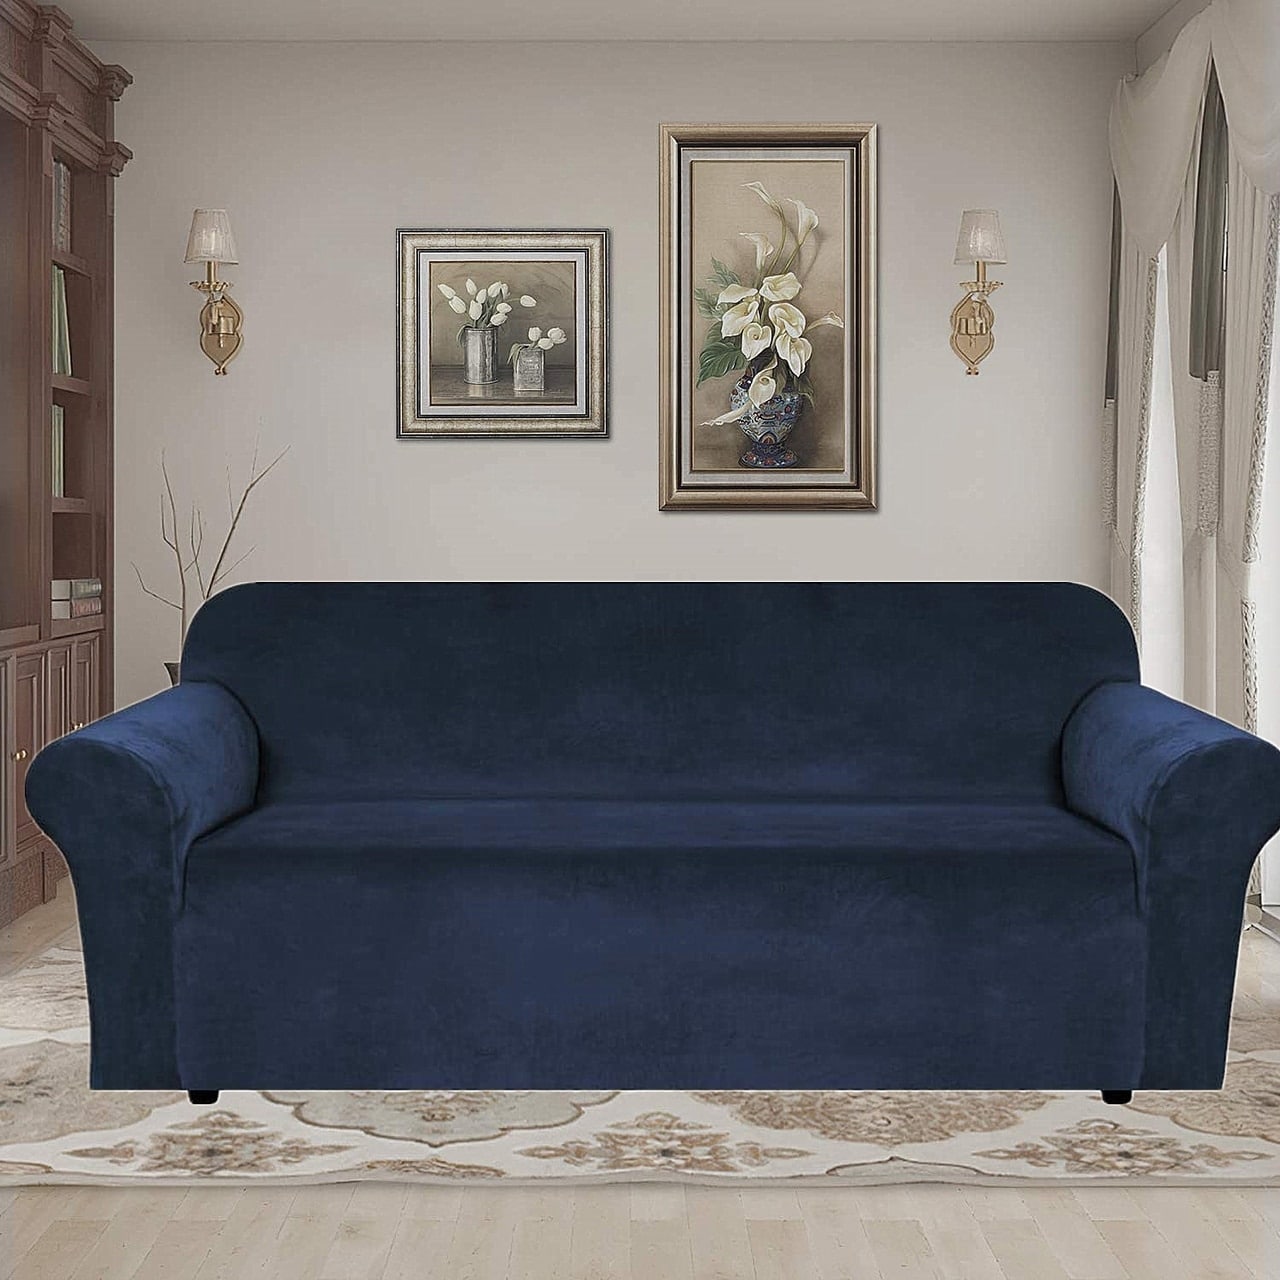 Details about    Thick Velvet Sofa Covers Elastic Slipcovers Sectional 1/2/3/4 Seater Plush Warm 